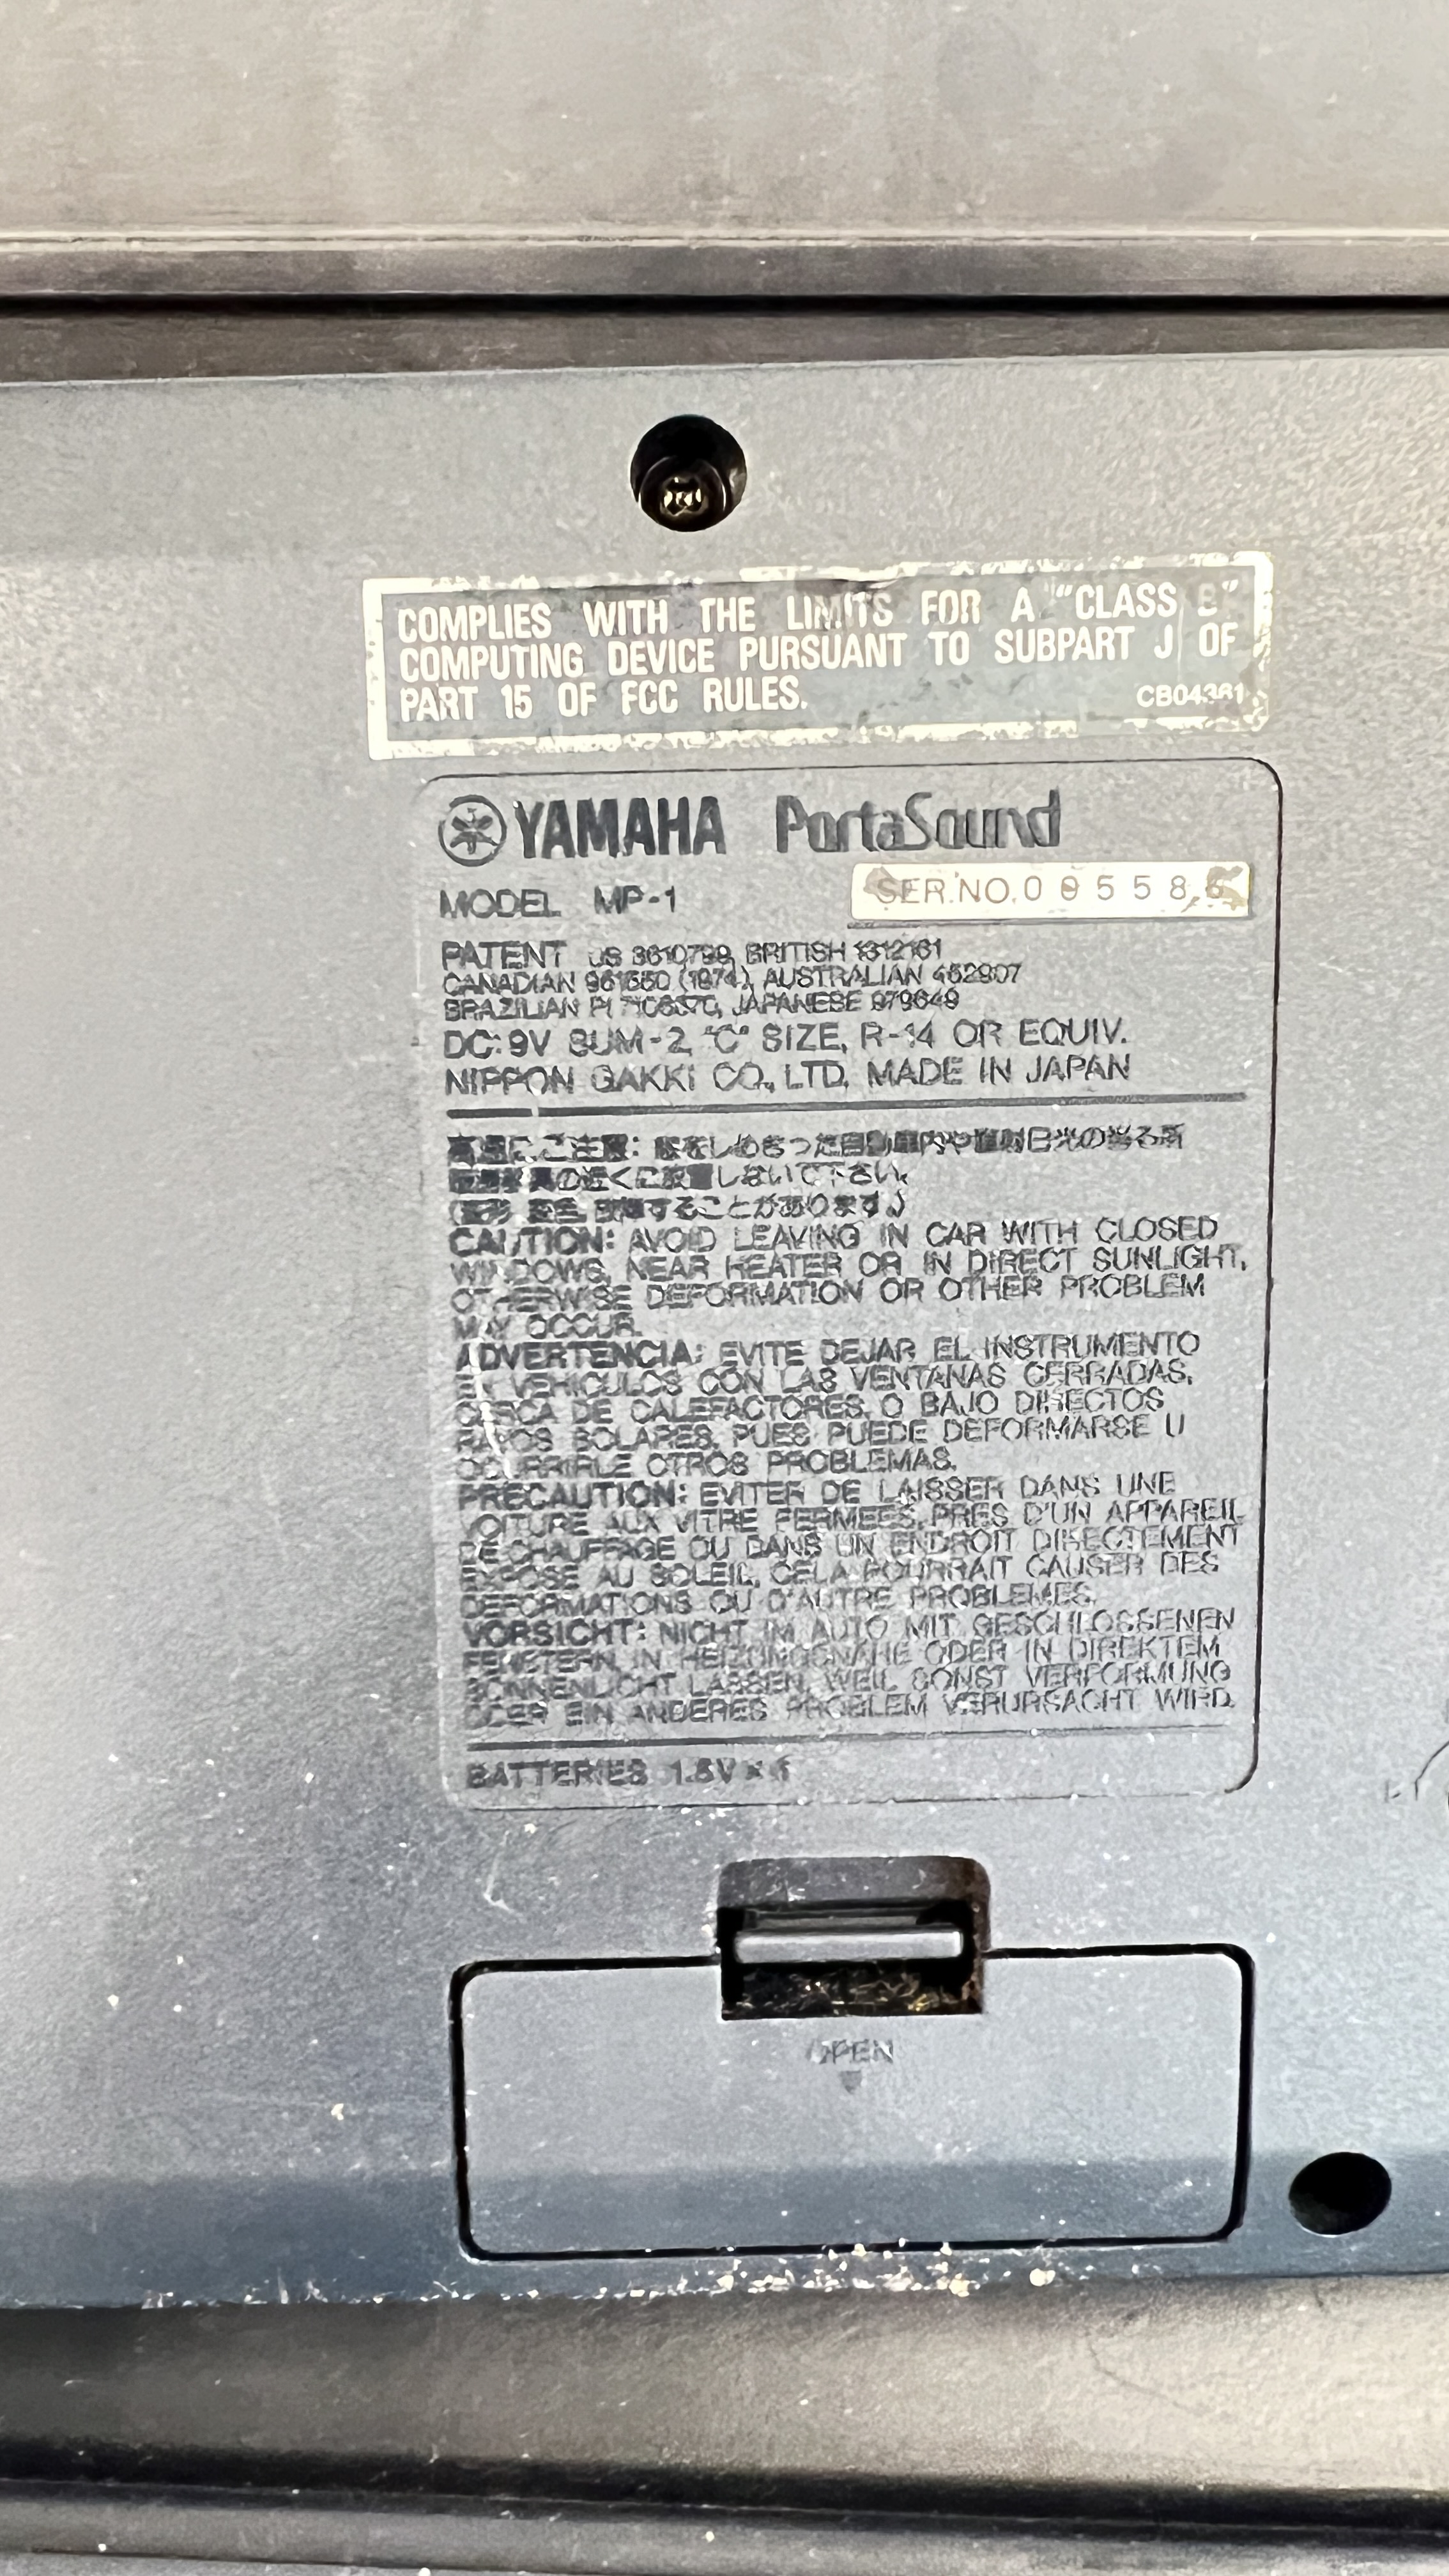 YAMAHA PORTASOUND MP-1 IN CARRY CASE, NO POWER ADAPTOR - SOLD AS SEEN - AS CLEARED. - Image 5 of 6